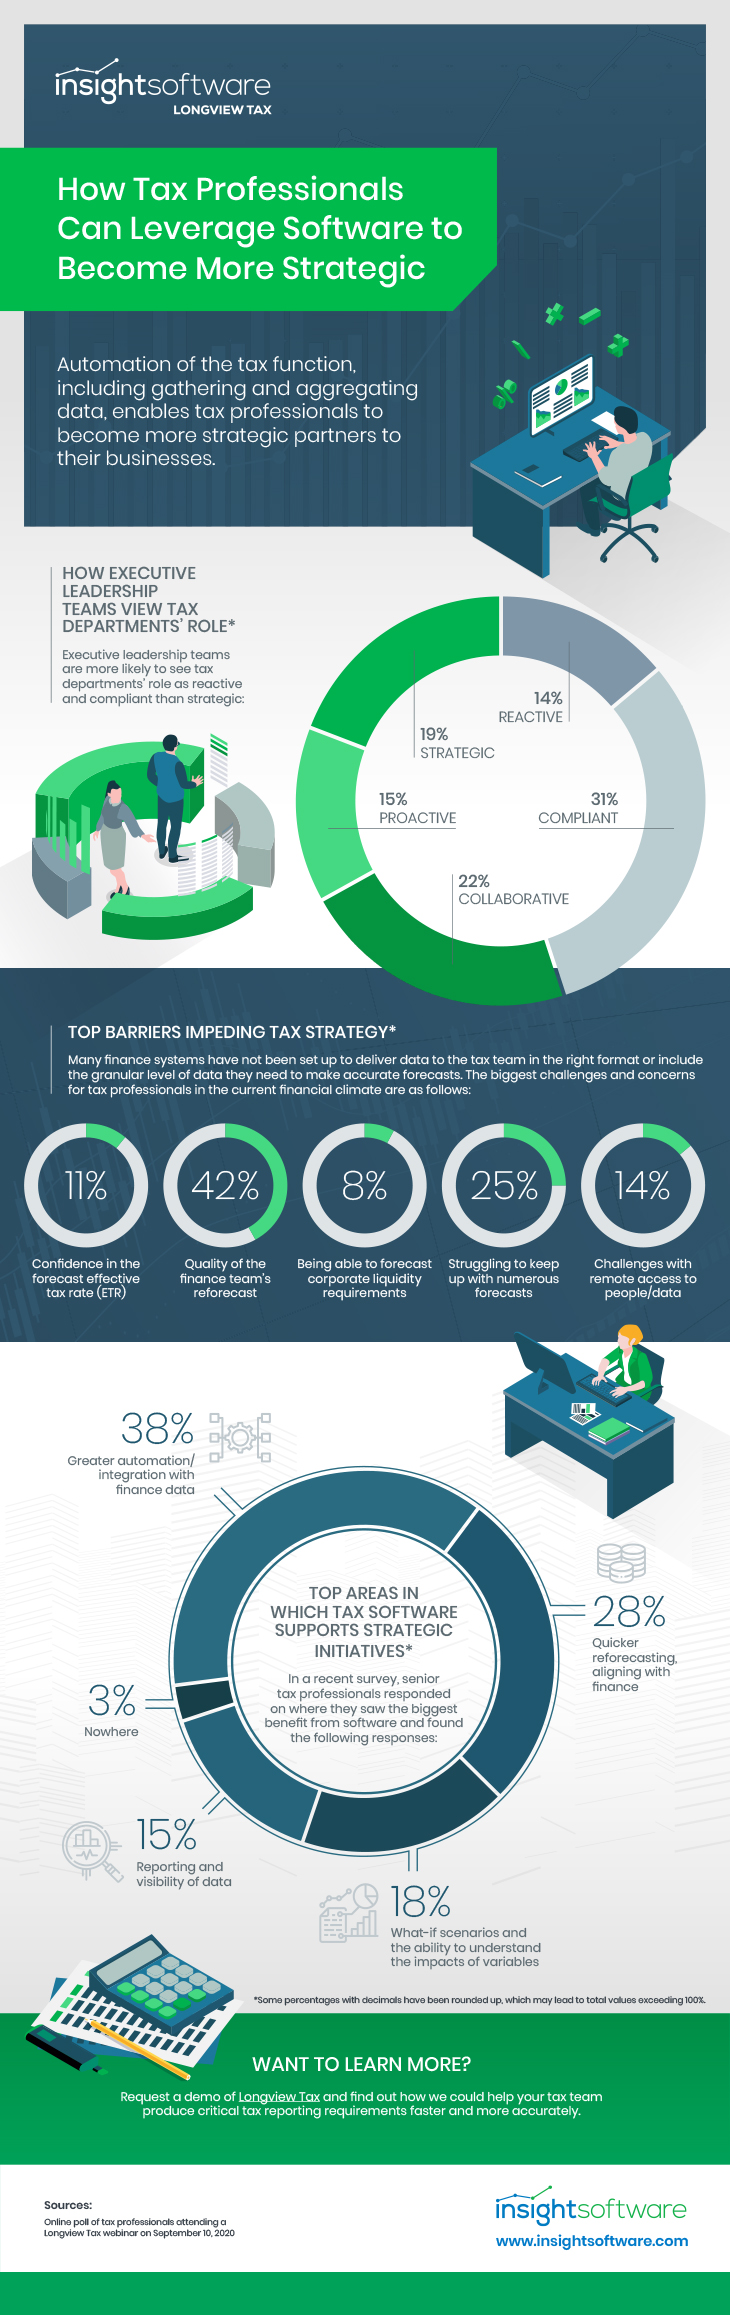 11 2020 Tax Infographic Enhancing Value For Tax Teams